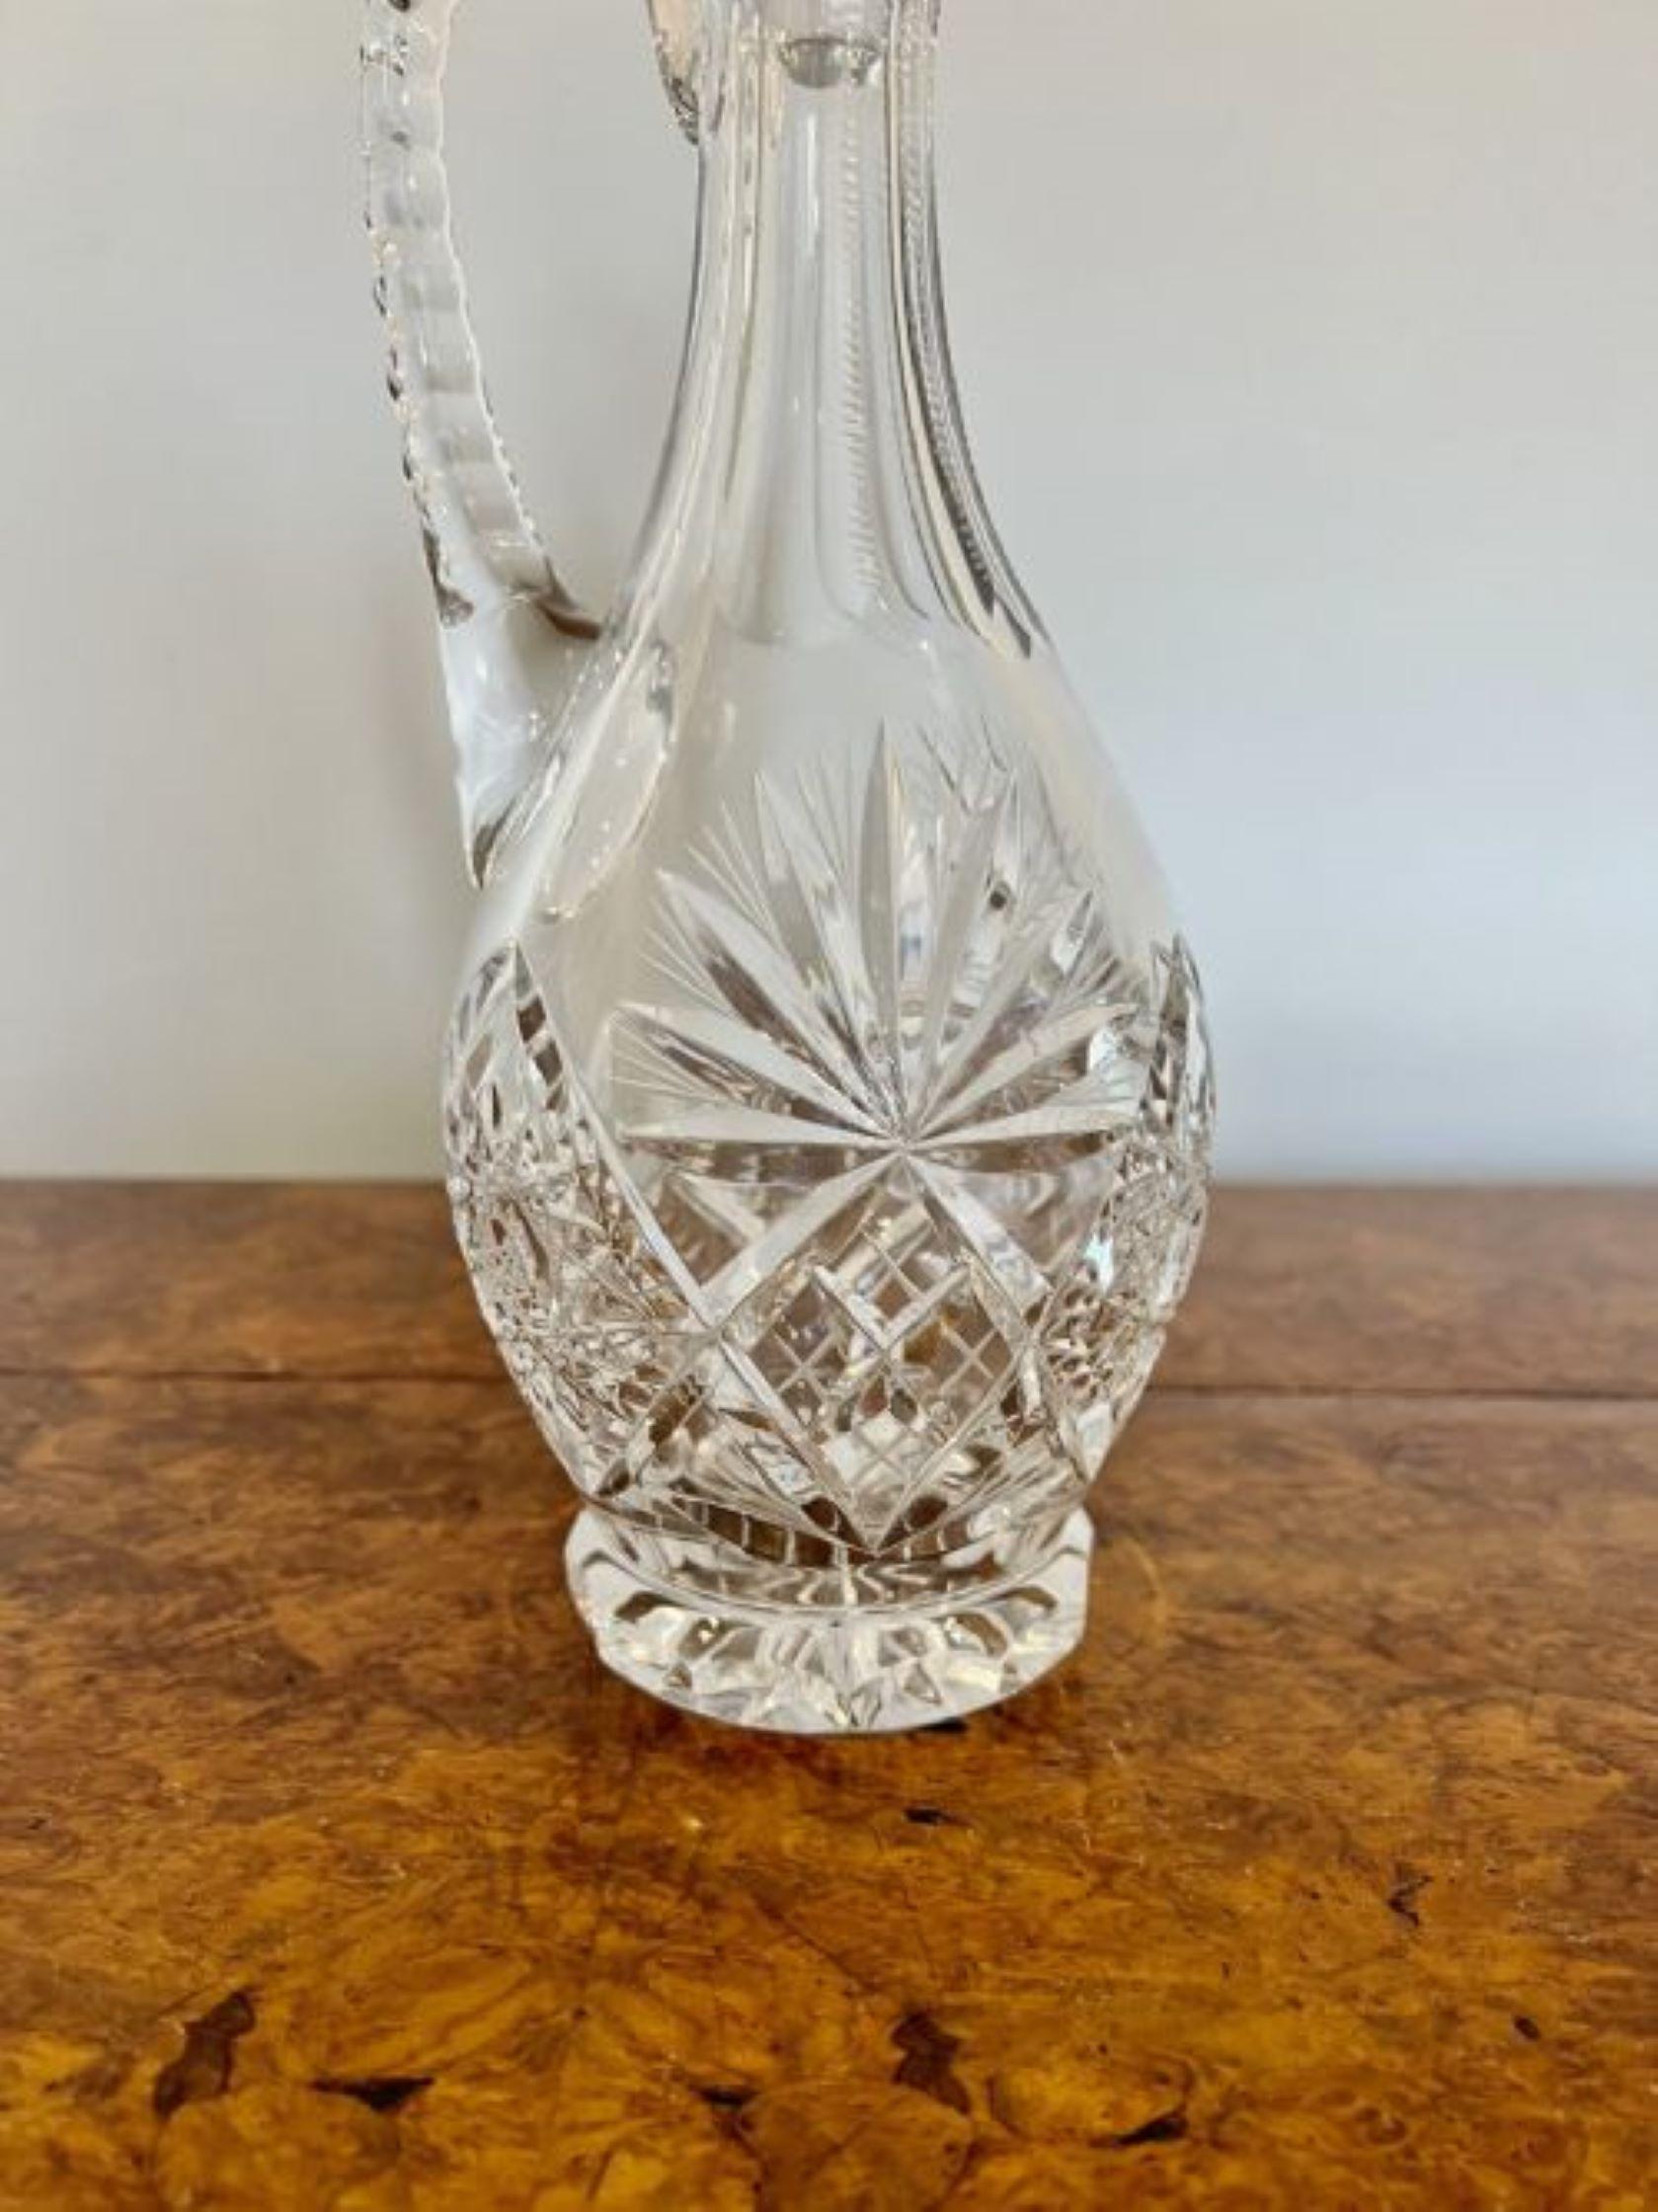 Wonderful quality antique Edwardian cut glass decanter, having a quality shaped cut glass decanter with a shaped handle and original glass stopper. 
